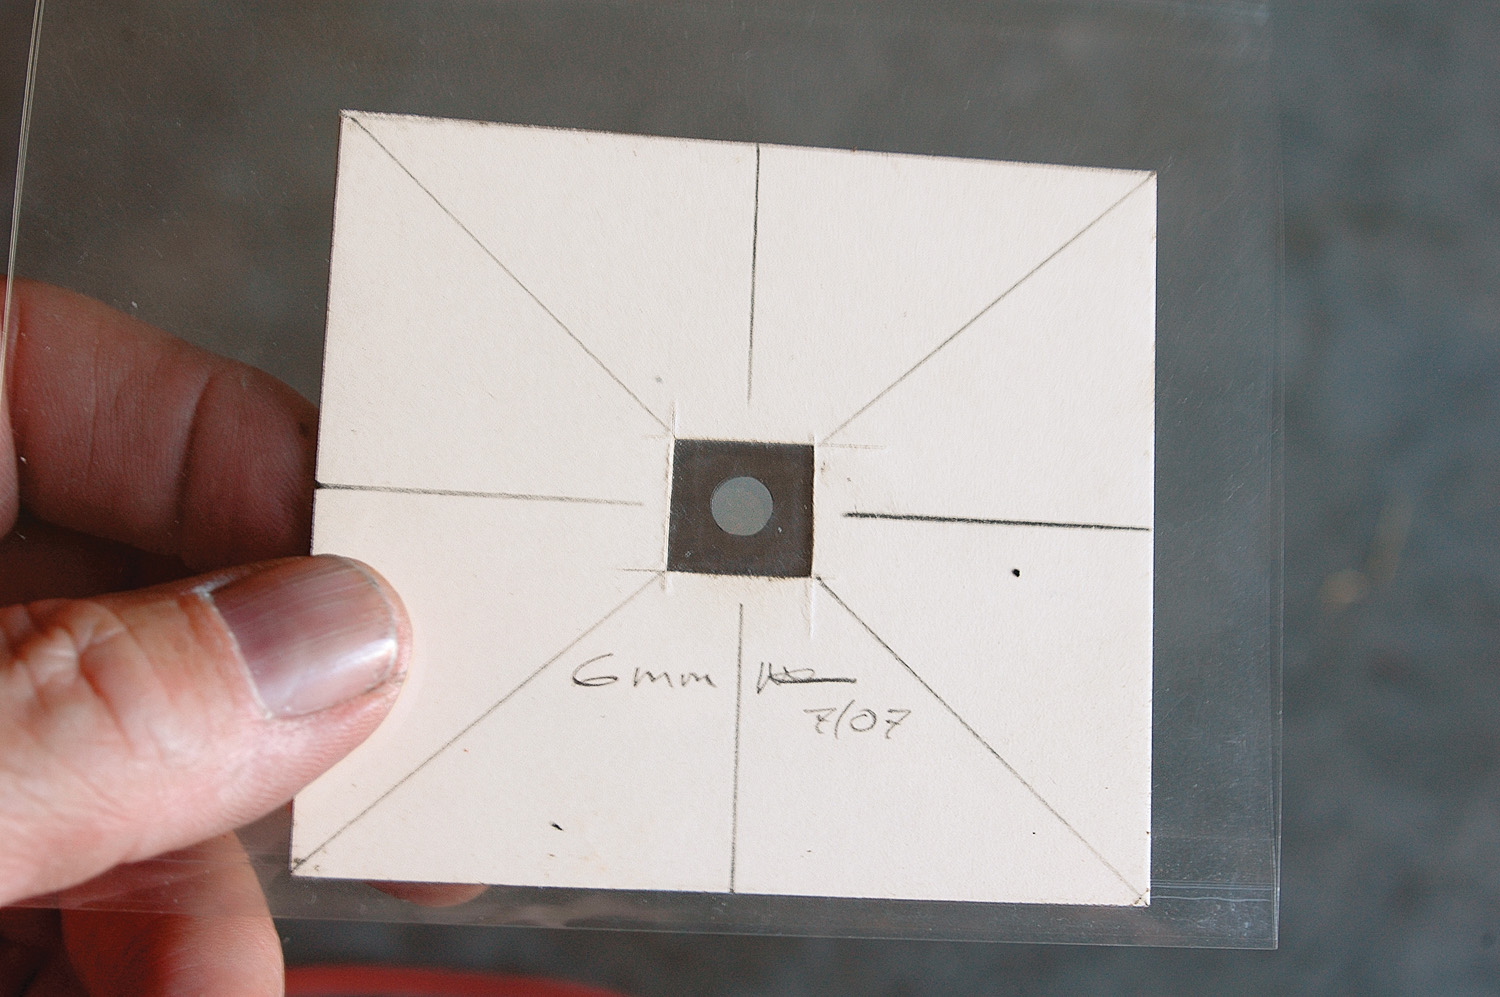 After extensive calculations, conjecture, and testing, a camera obscura aperture of 6mm was selected, milled from an extremely thin titanium sheet.